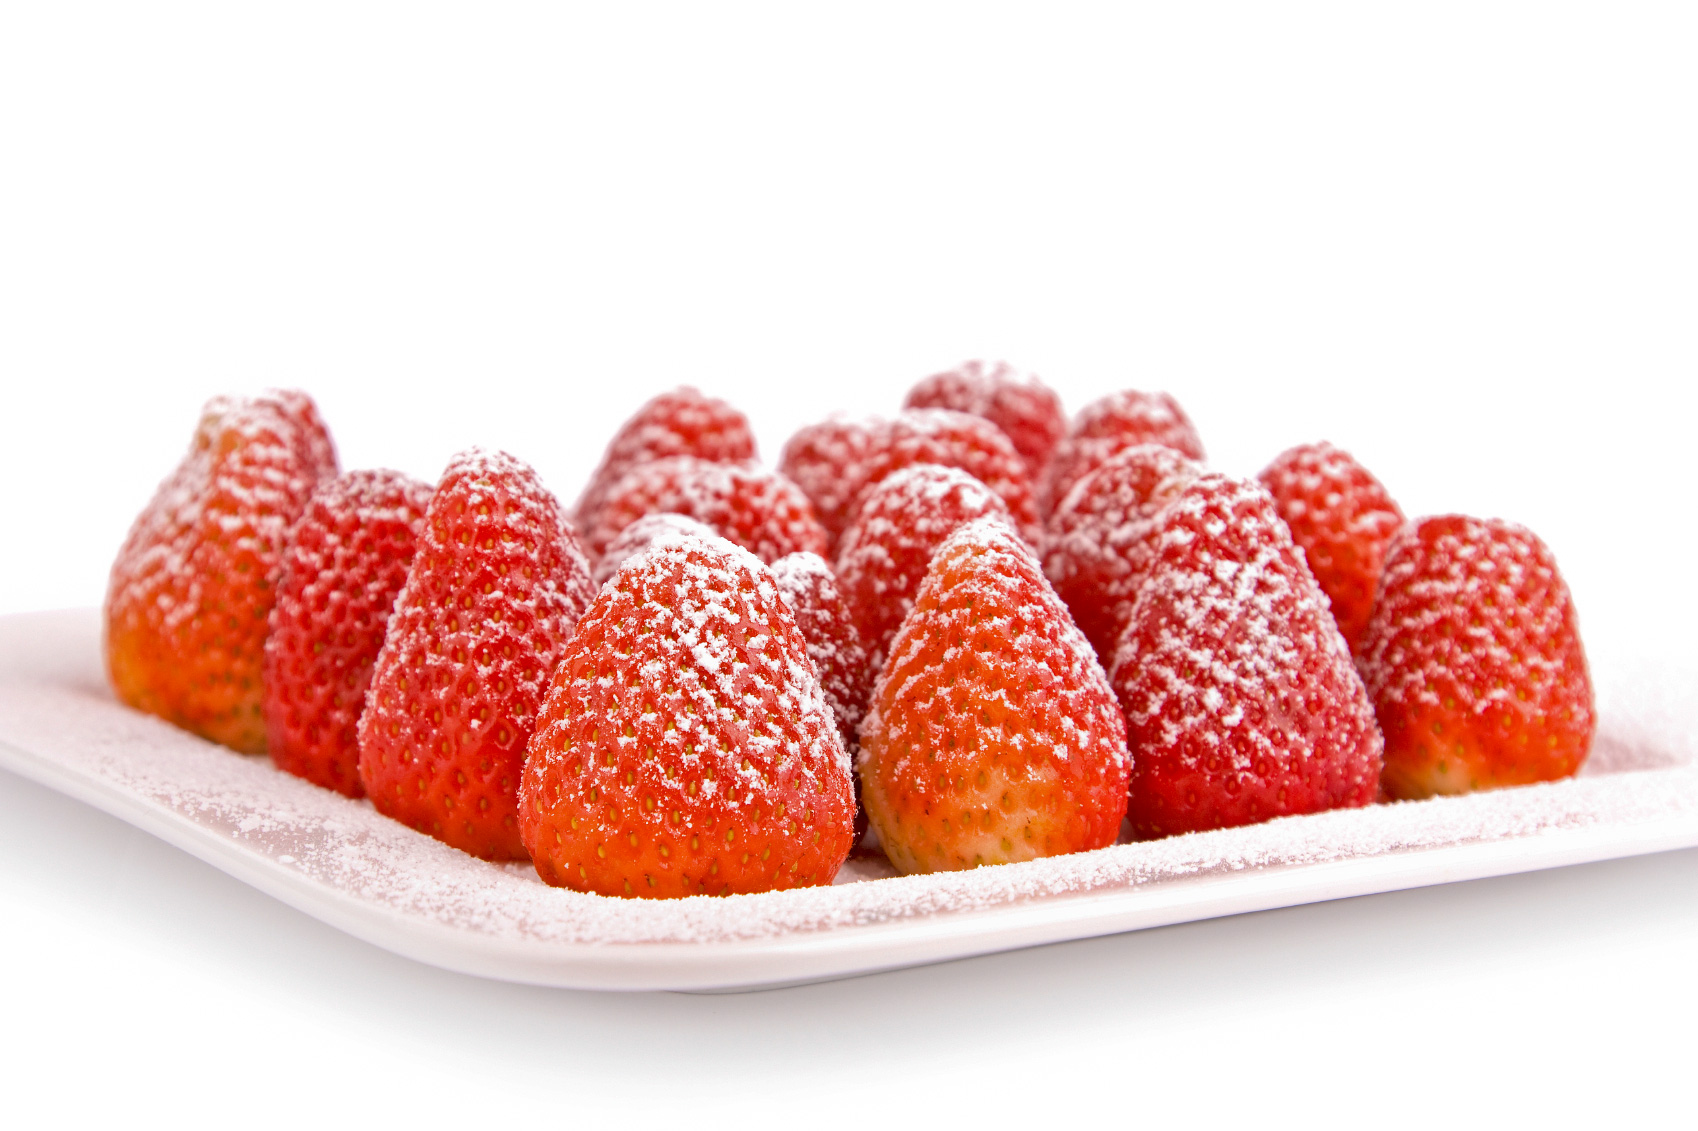 Strawberries Dusted in Powered Sugar